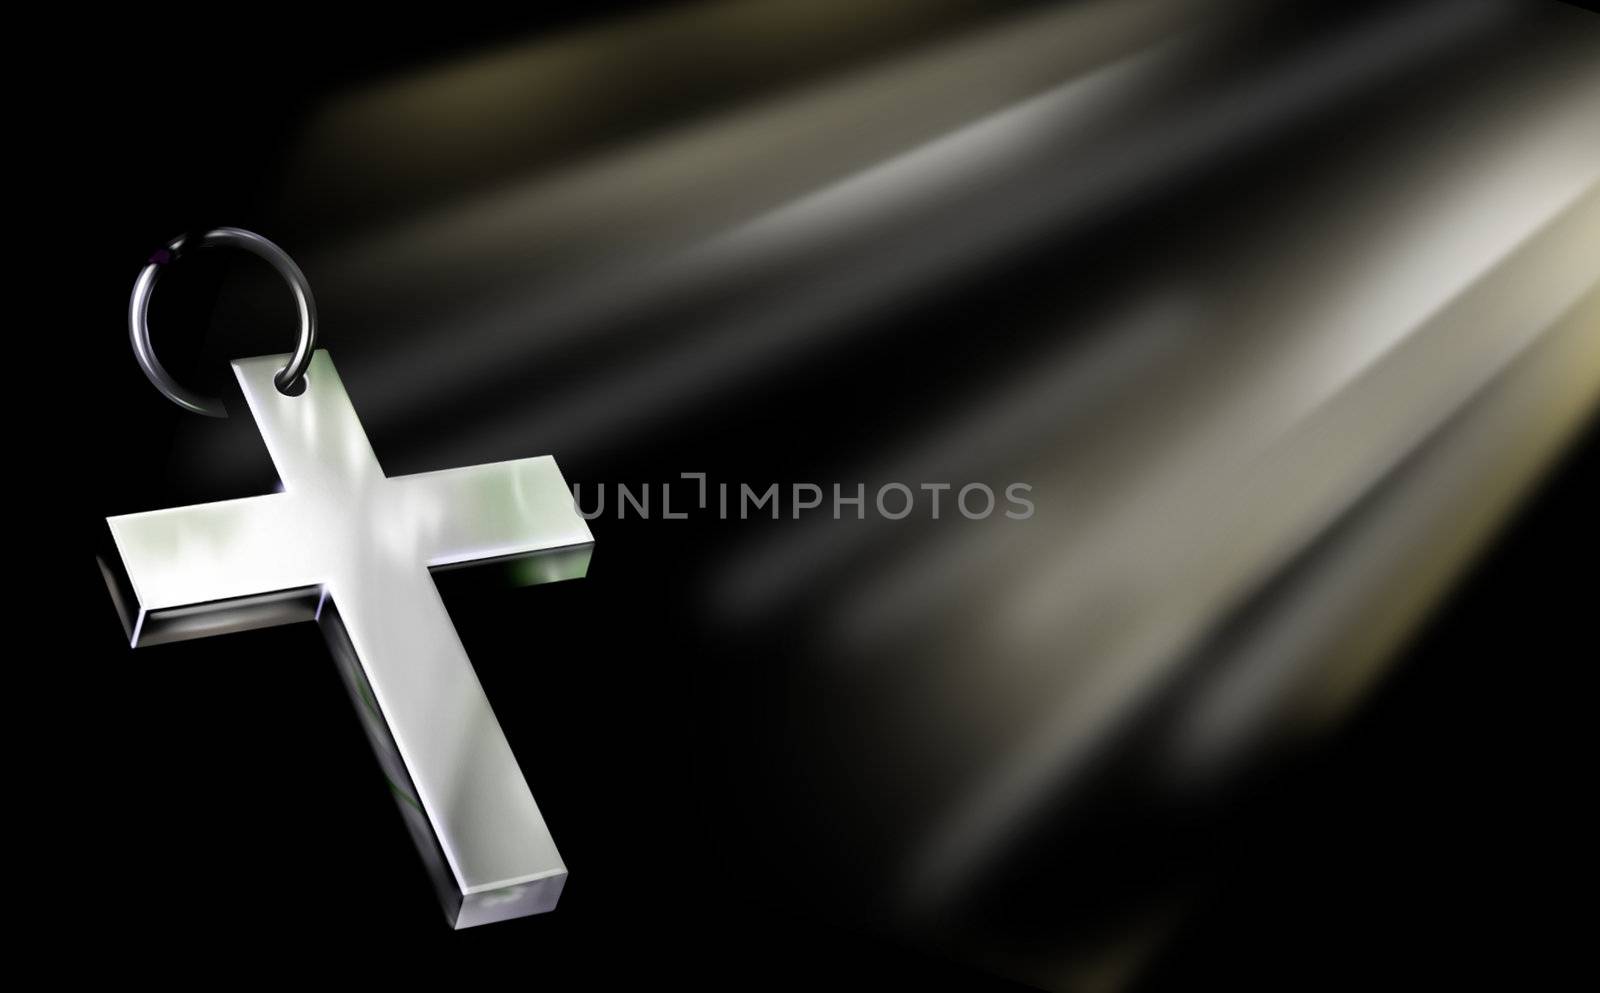 A nice picture with cross and light